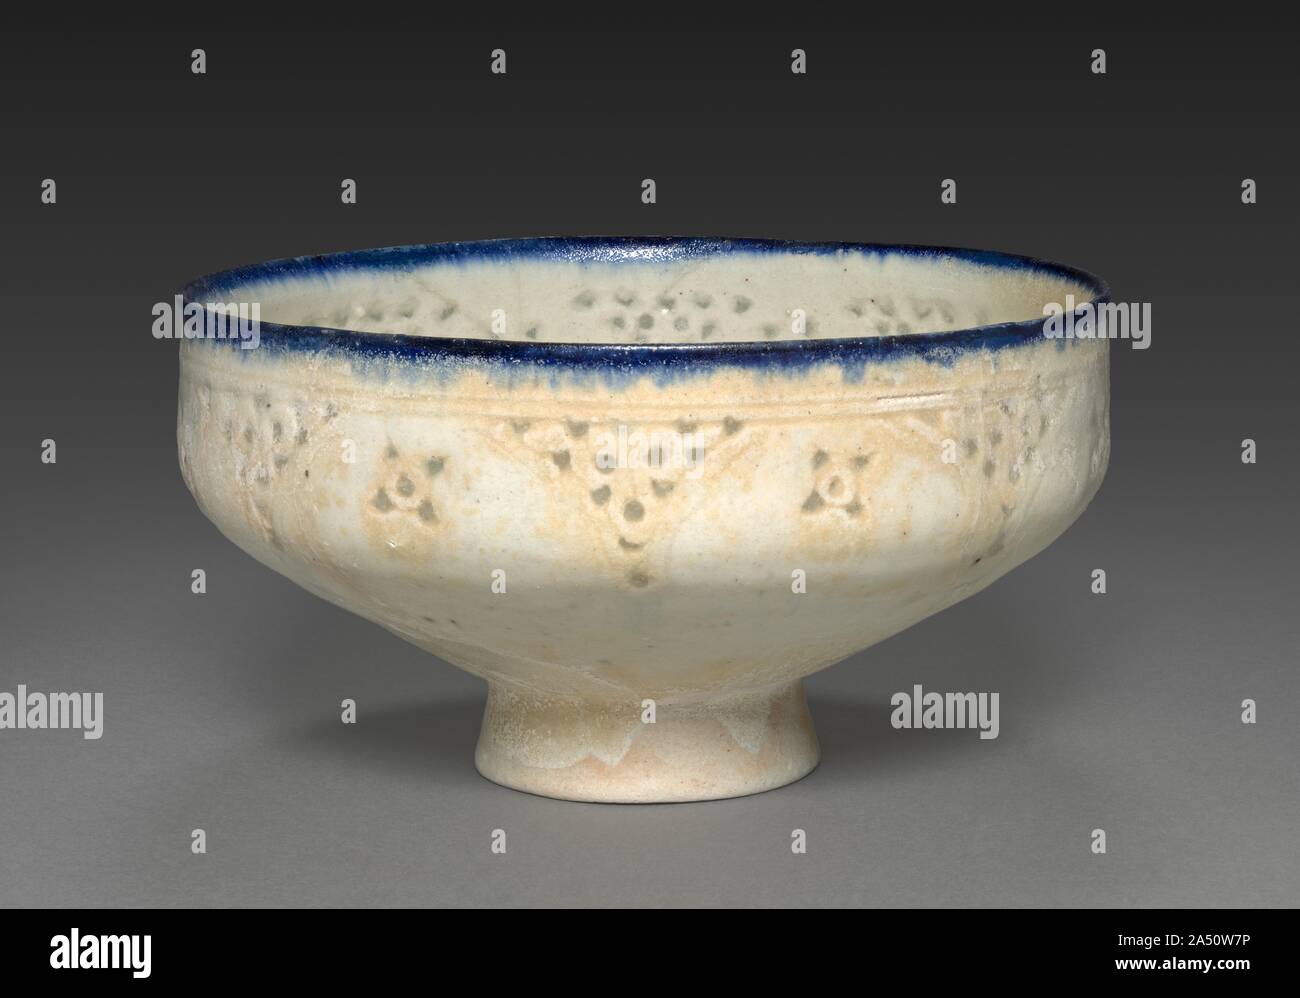 Footed Bowl, late 1100s-early 1200s. Iranian potters created transparency by piercing and glazing frit-body walls. Here, triangles and rosettes decorate incised scallops beneath the blue rim. The footed shape is derived from Iranian metal bowls. Stock Photo